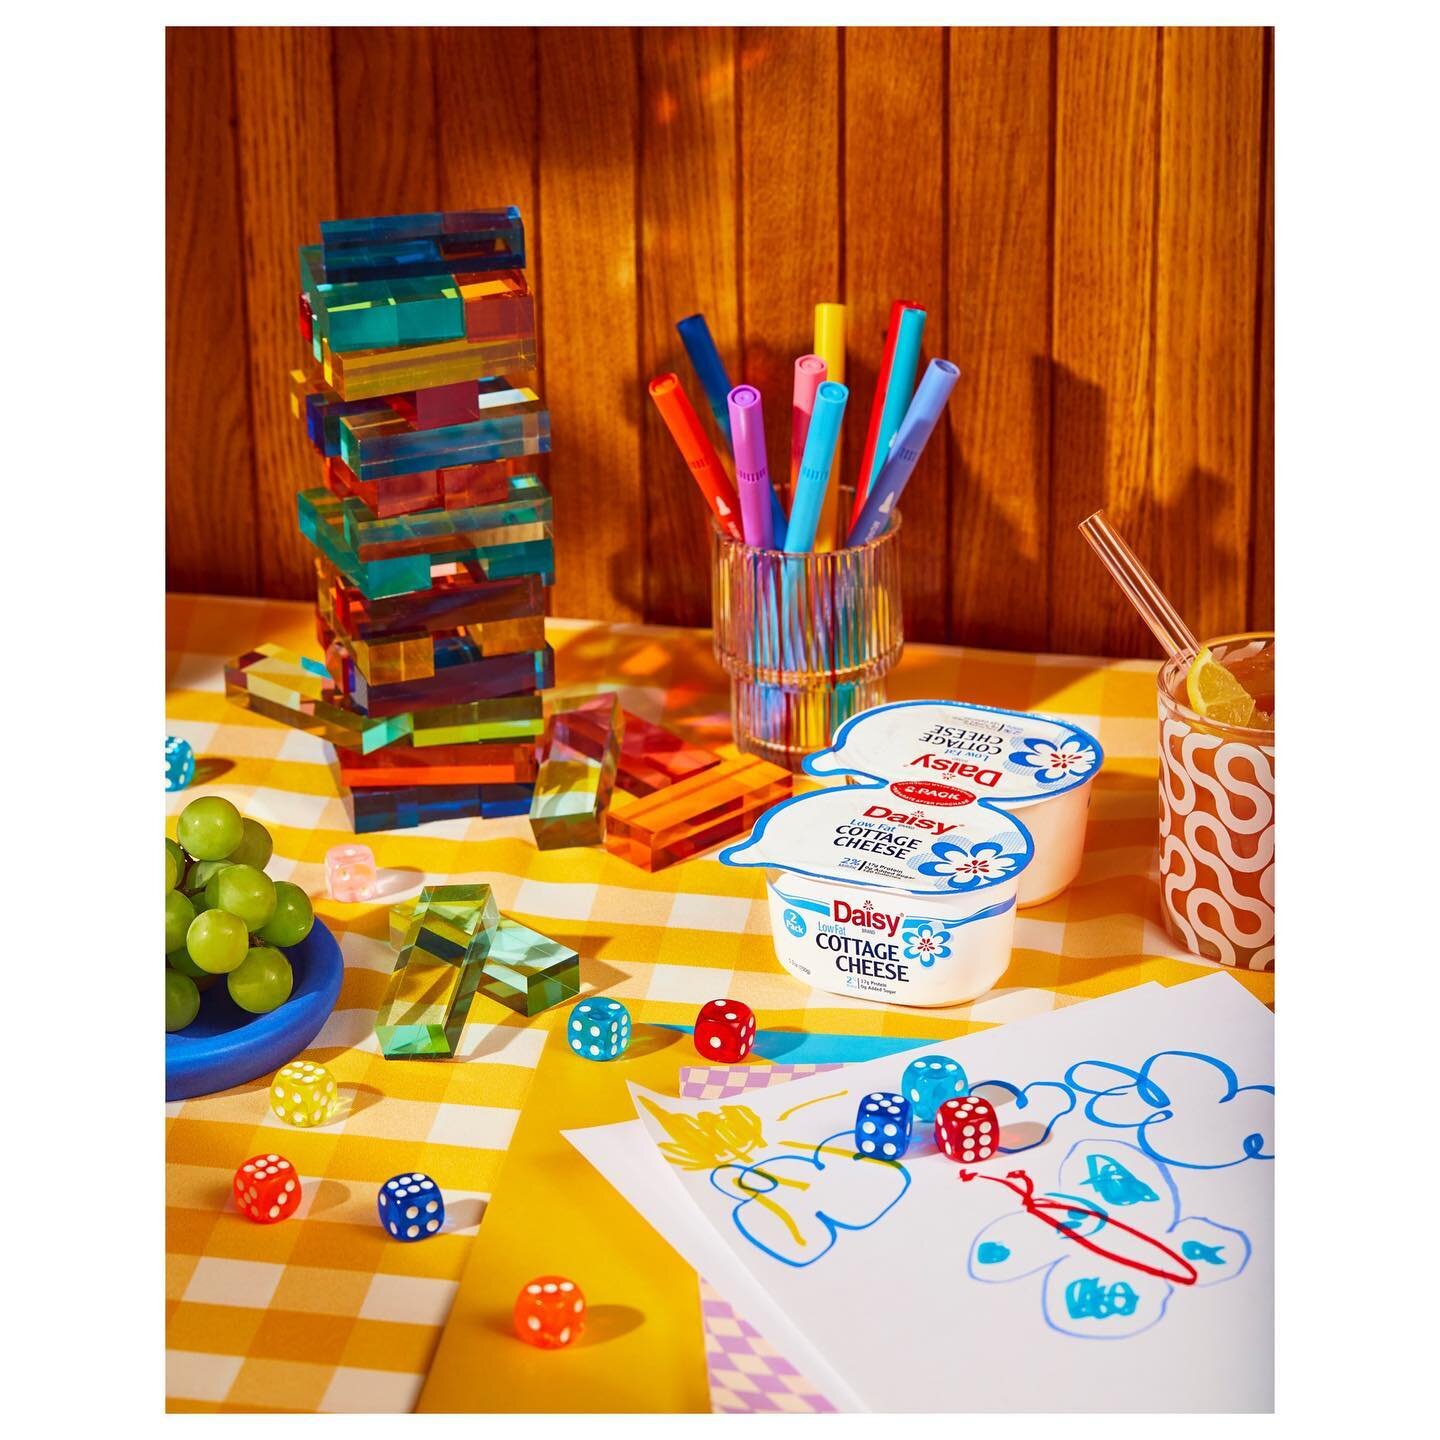 Playful, colorful shots from a relatively recent shoot for @daisybrand and @scarymommy. Got to work with a fantastic team. 

Photo: maria.e.be
Art direction: @juvacc 
Prop styling: @adrianosis @bloodorangeagency 
Prop assist: @juliajuliaroserose @tay